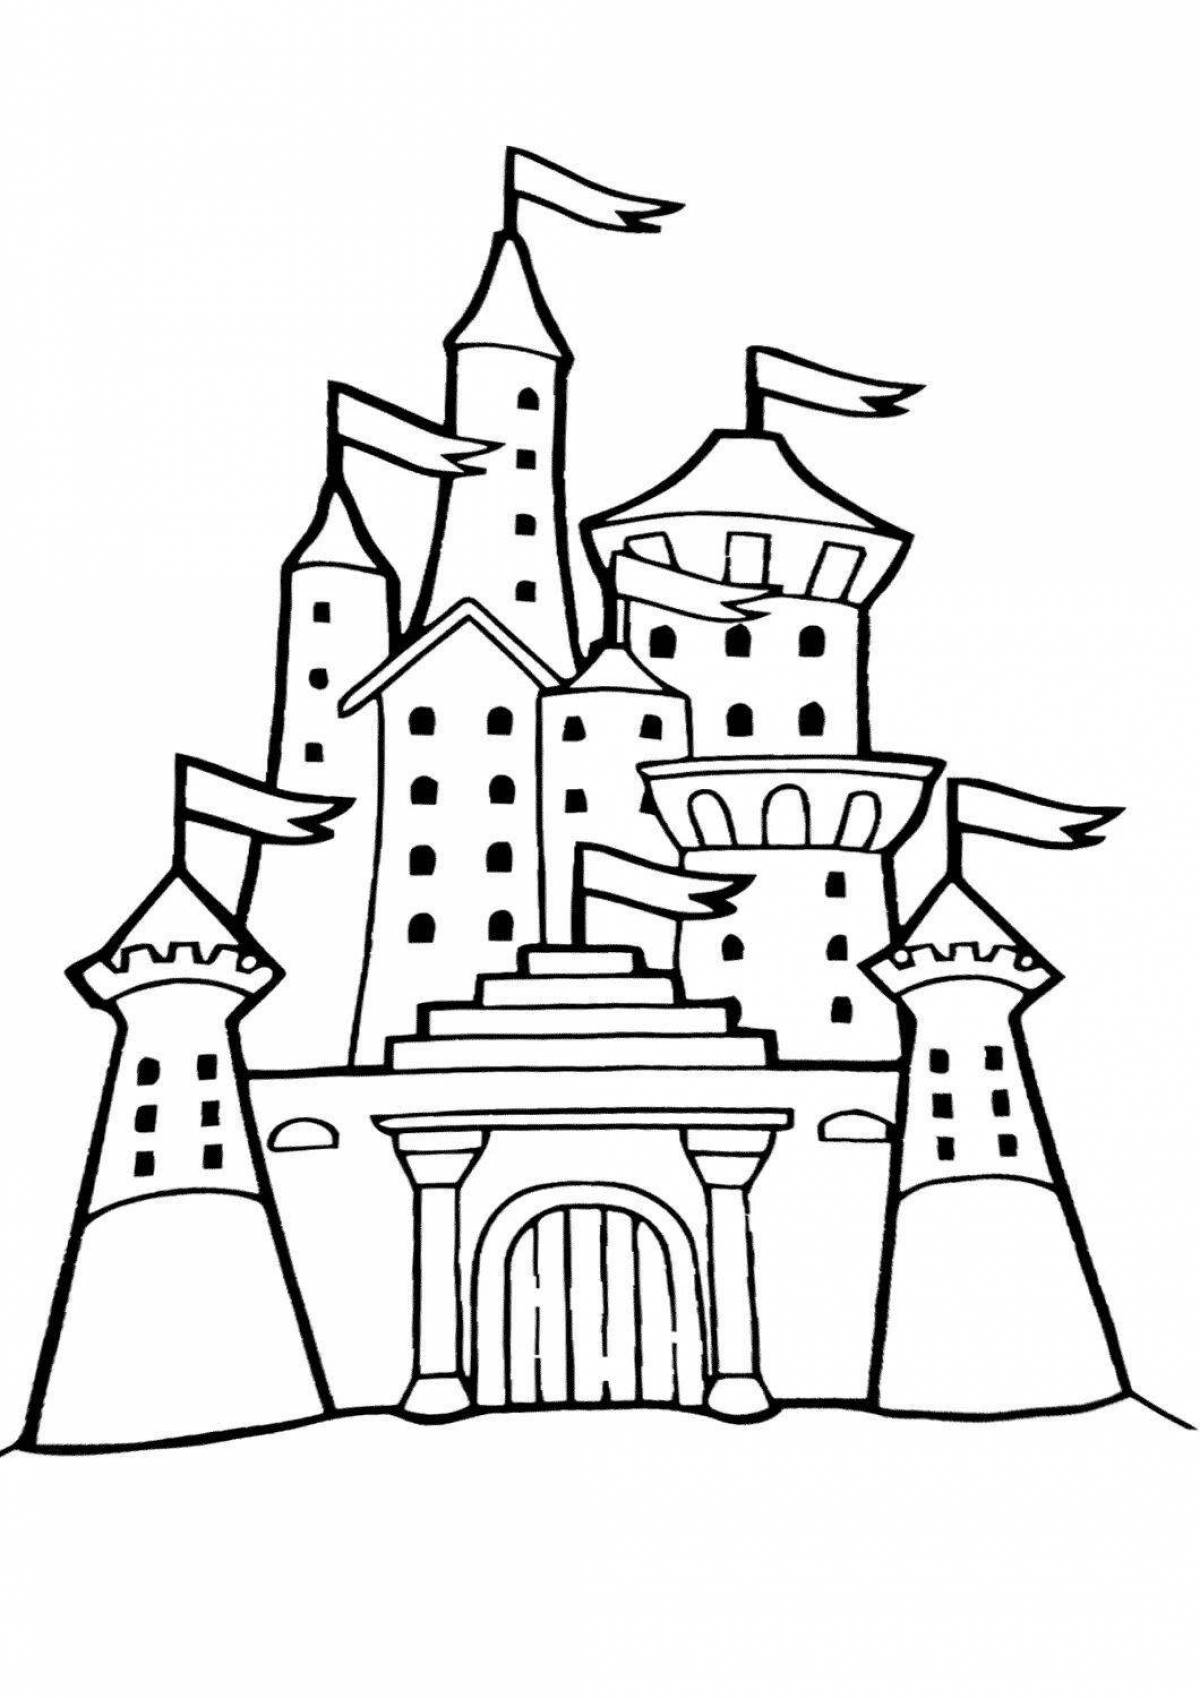 Great castle coloring book for 6-7 year olds